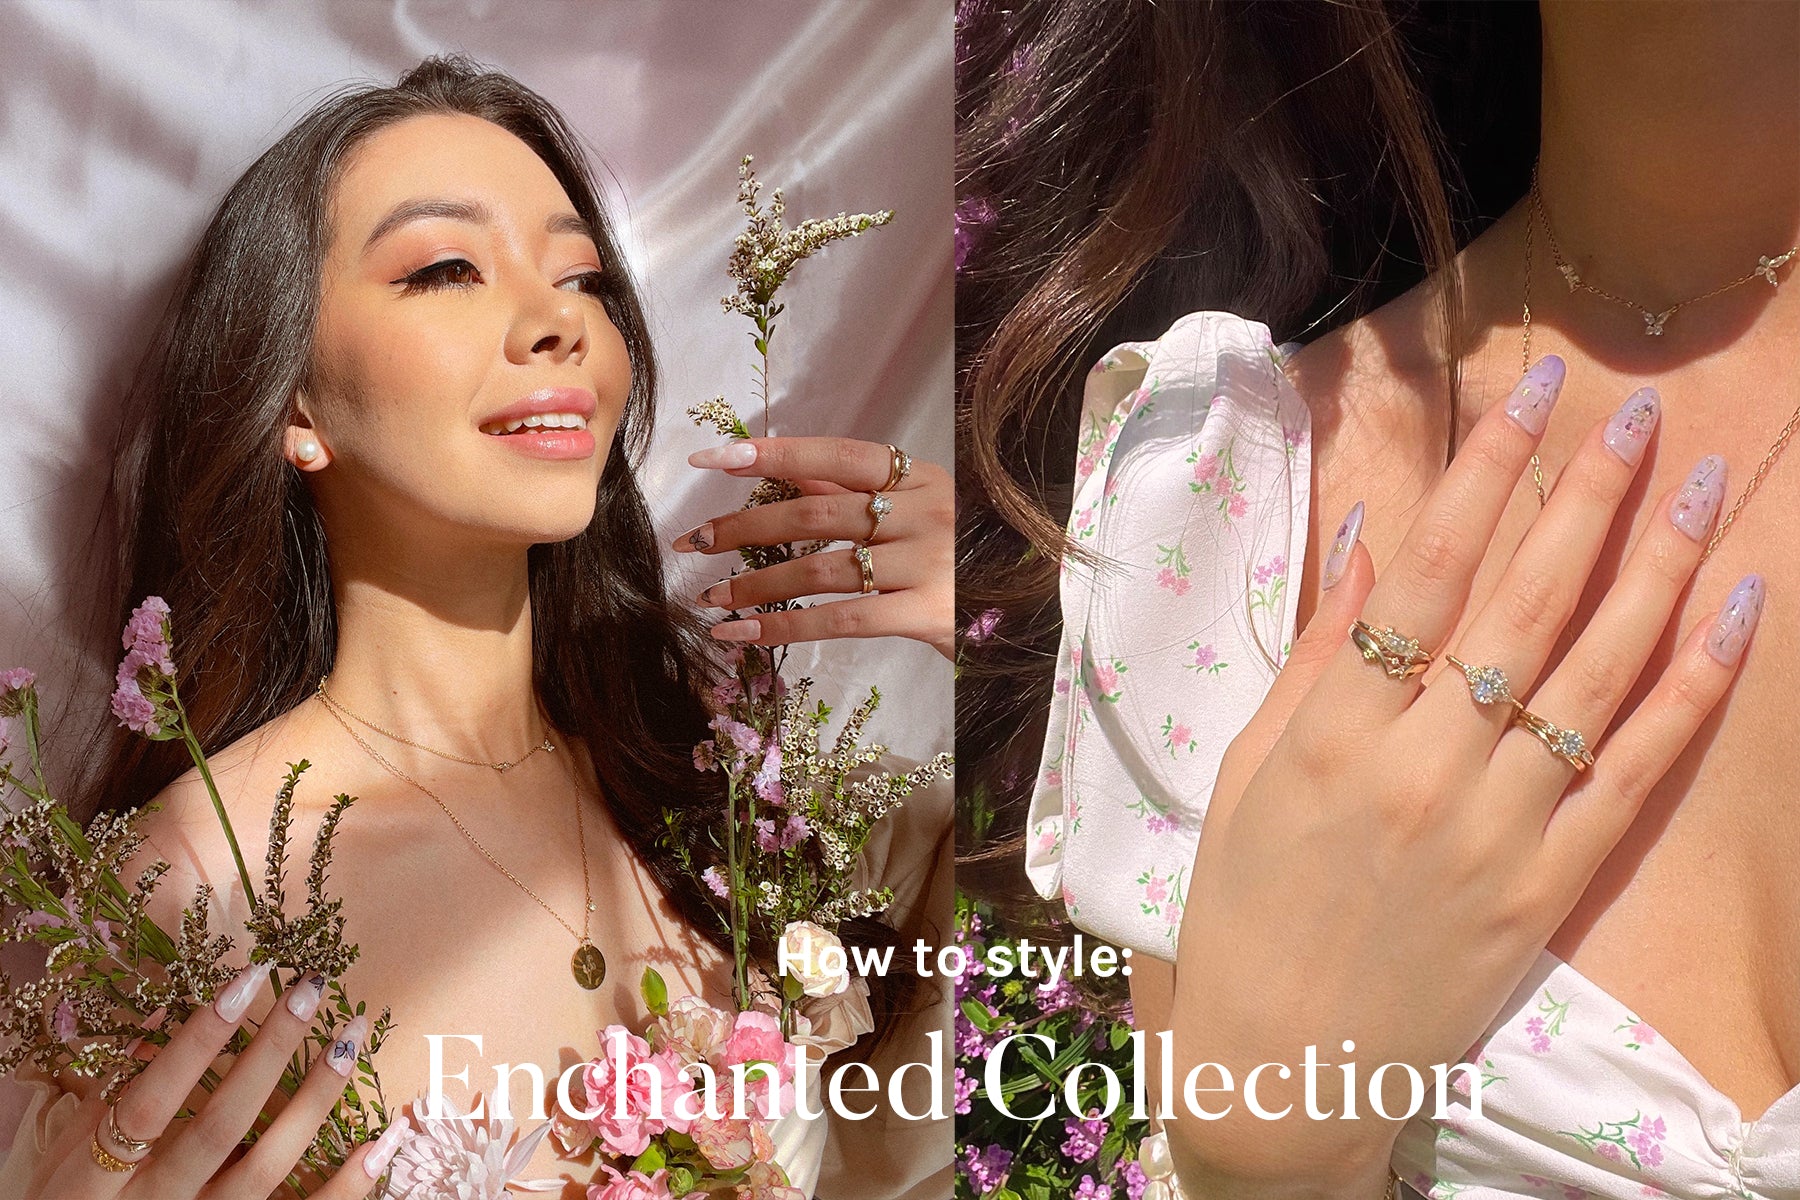 How To Style: The Enchanted Collection